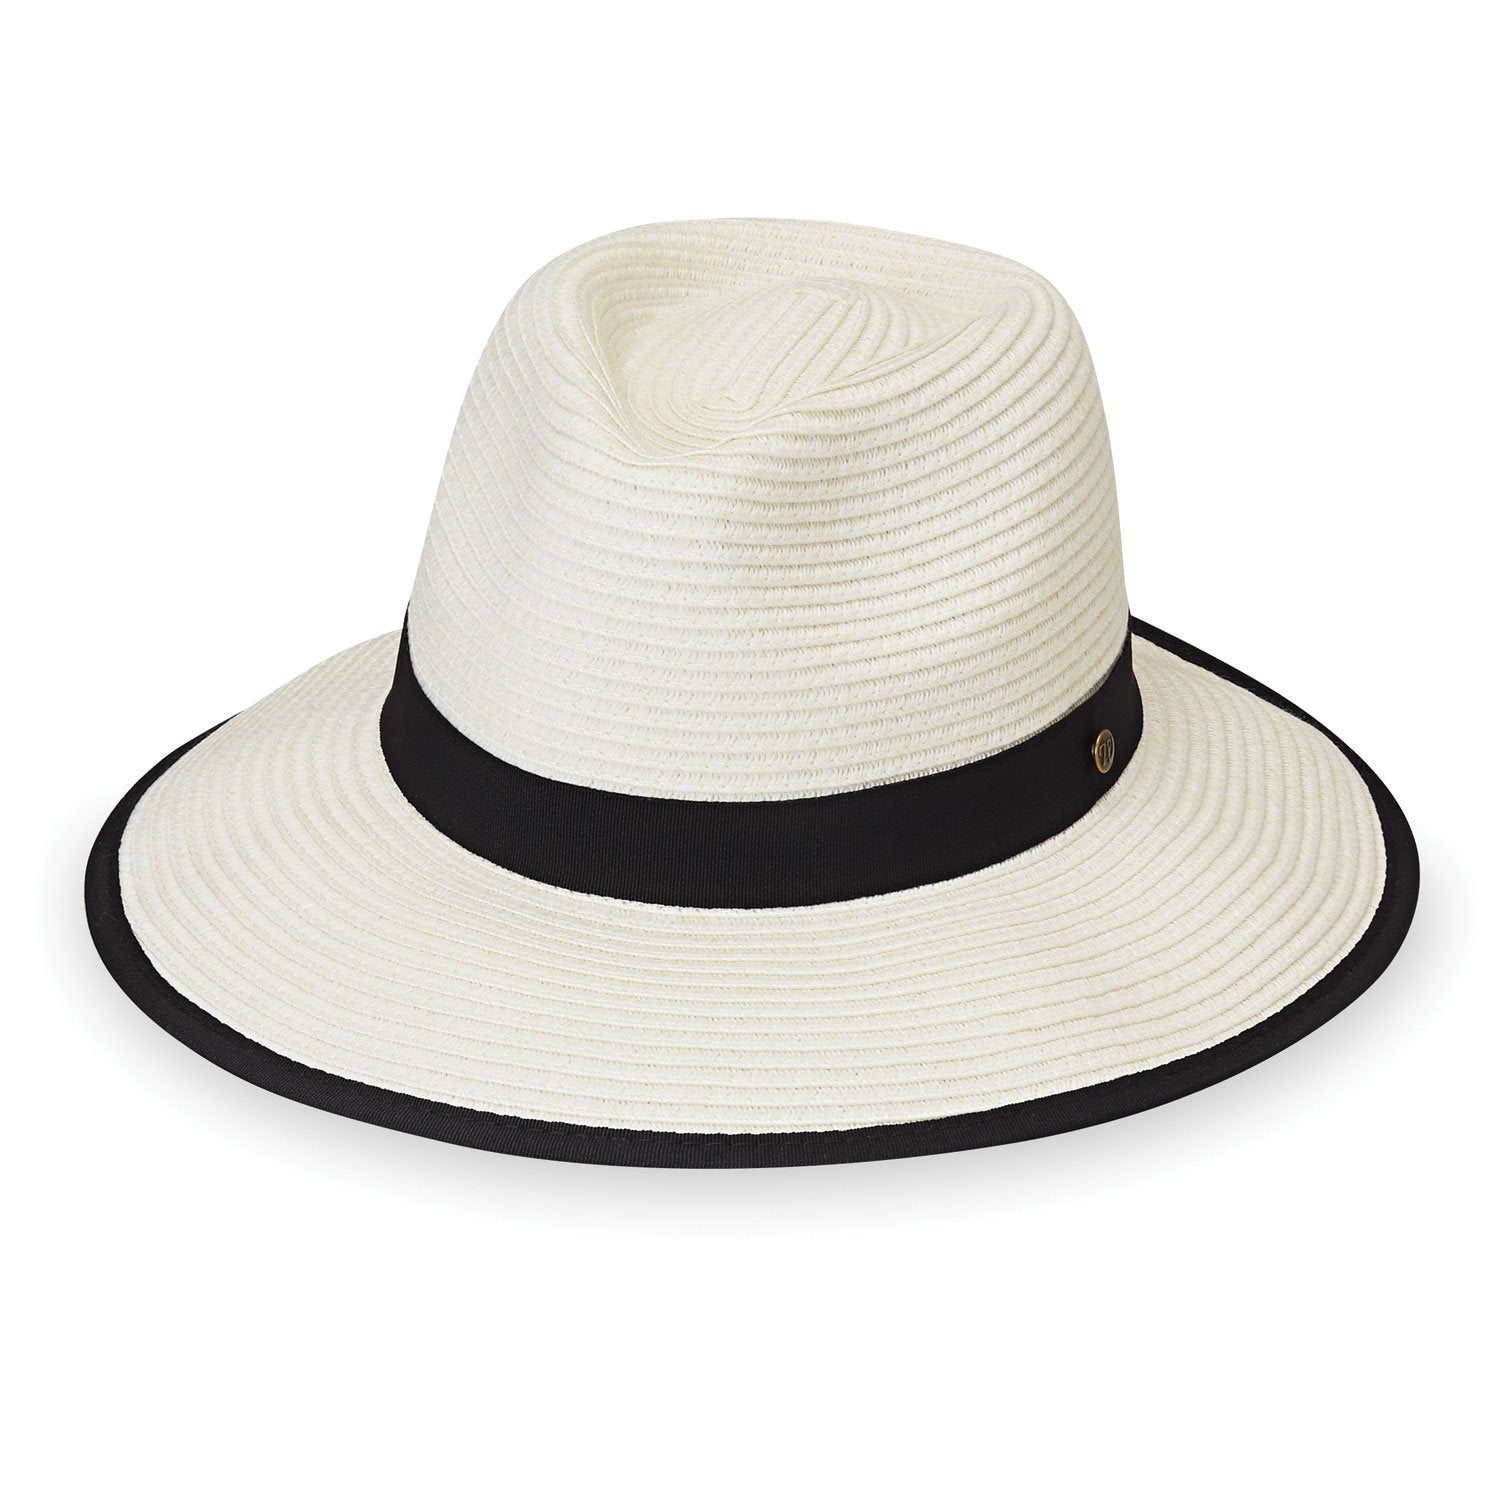 Featuring Women's Packable Gabi Ponytail Fedora Style UPF Sun Hat in Ivory from Wallaroo